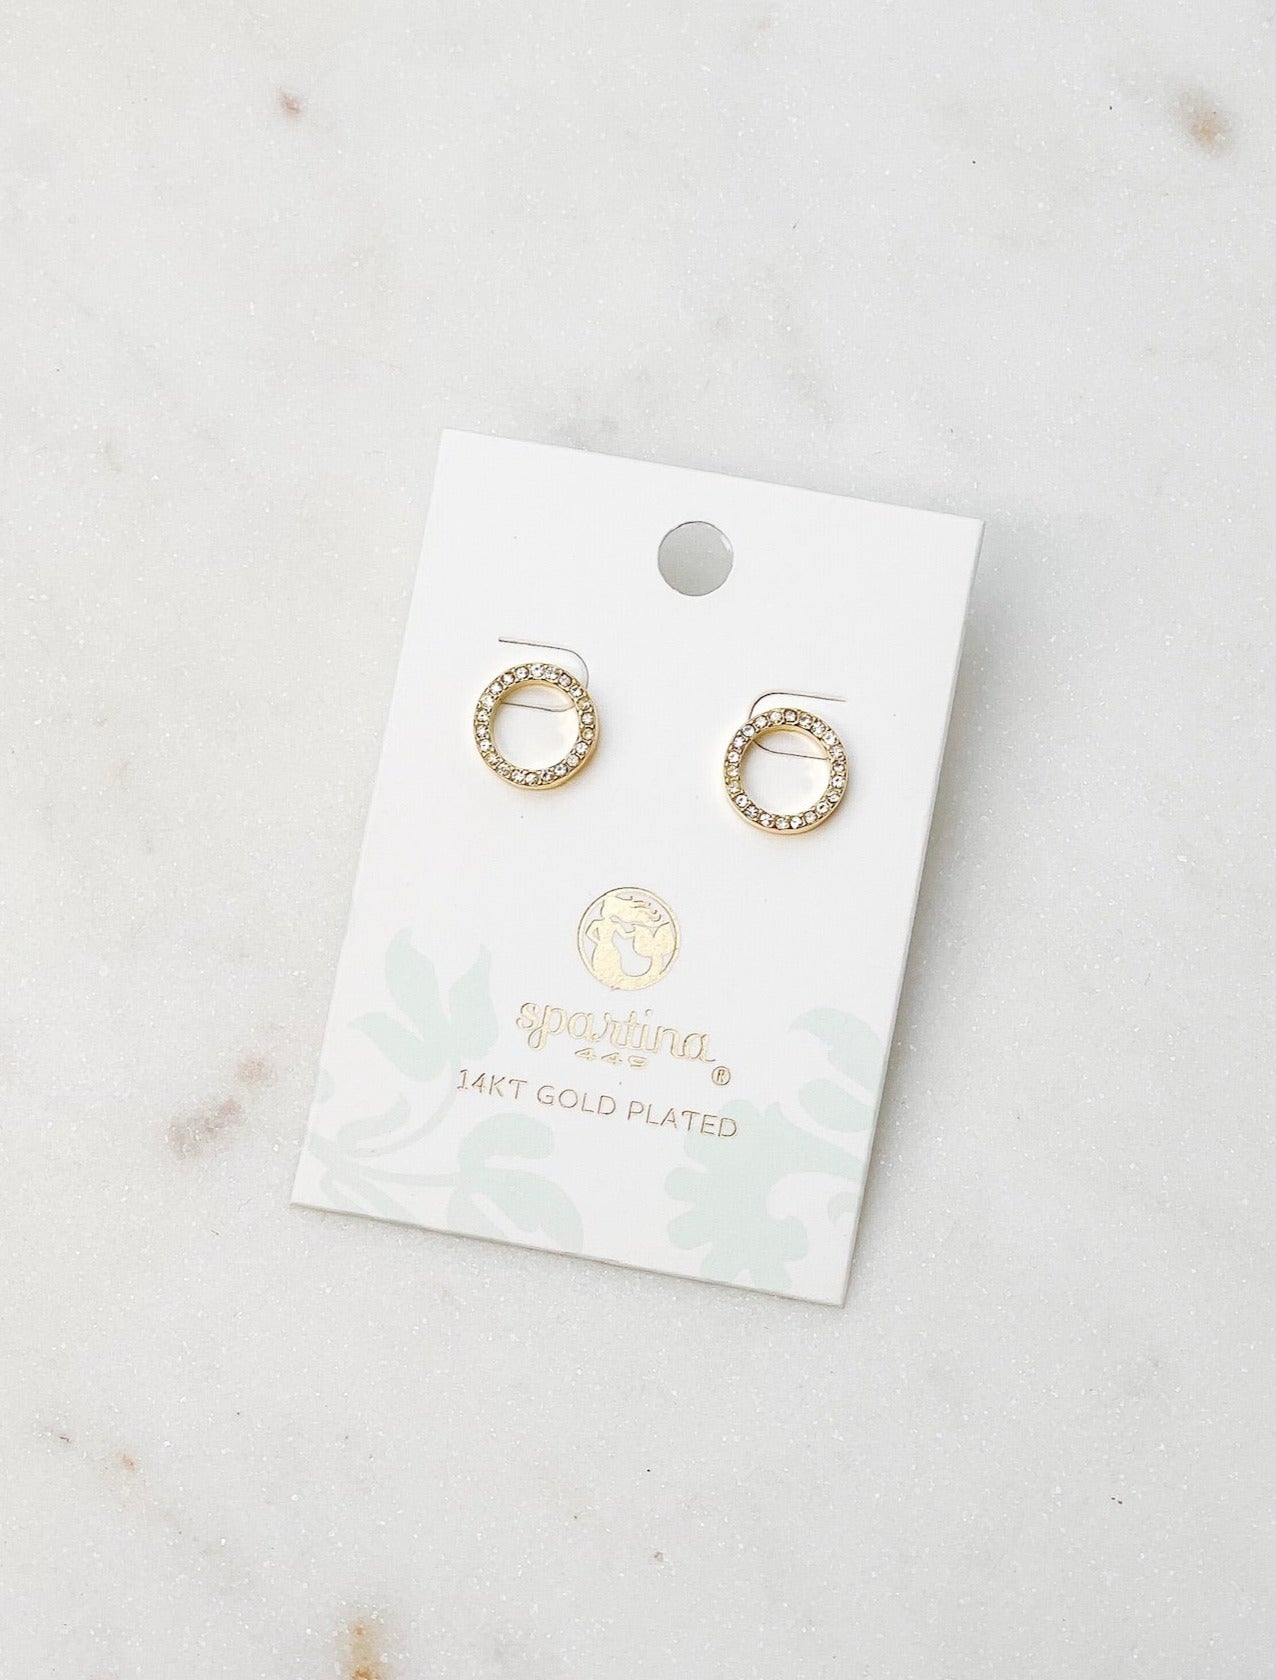 Crystal Eternity Stud Earrings by Spartina - Gold